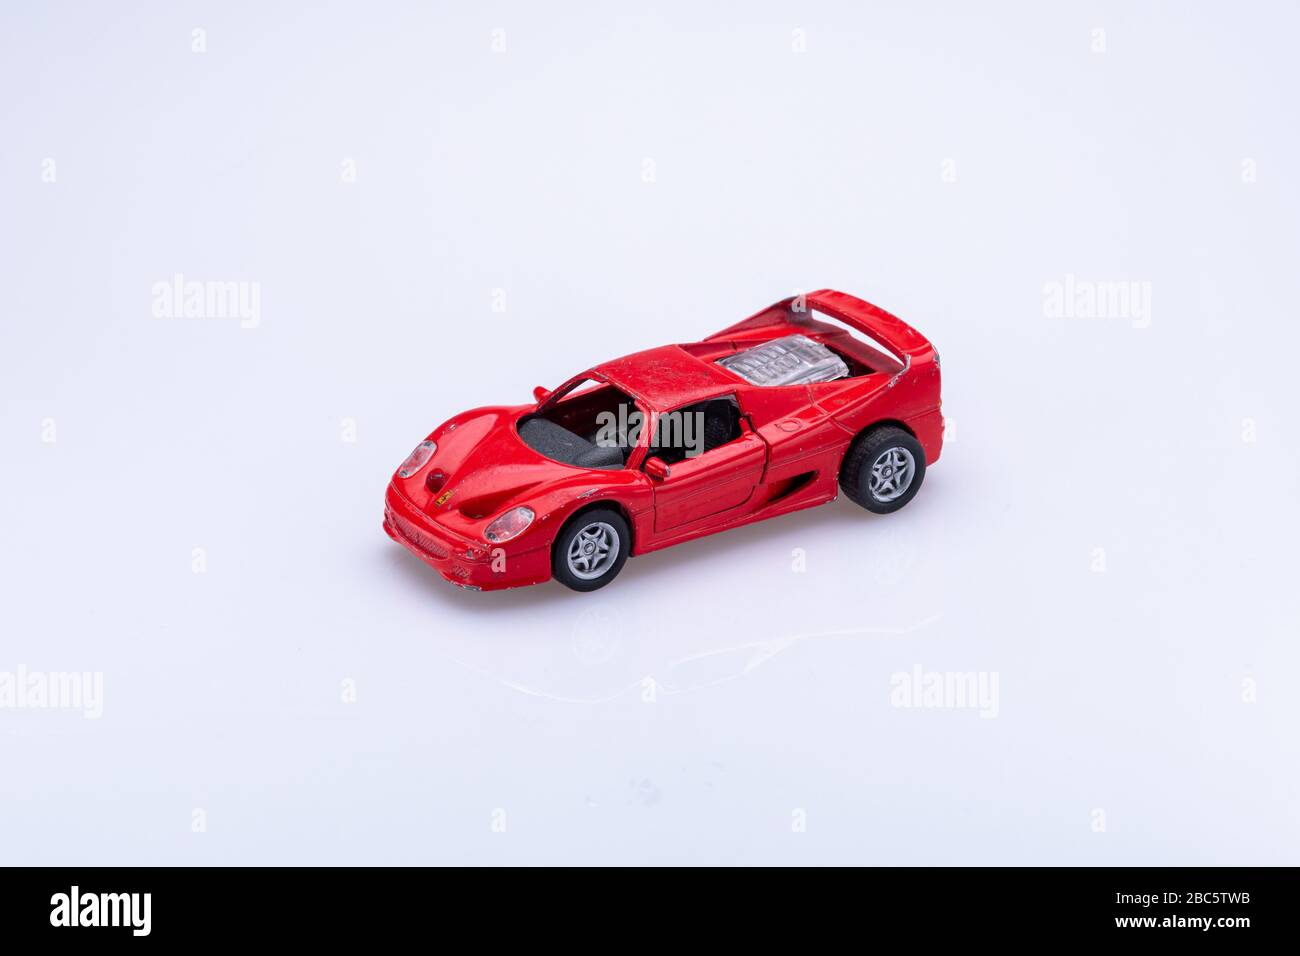 small old fashion car toy isolated in front a white background Stock Photo